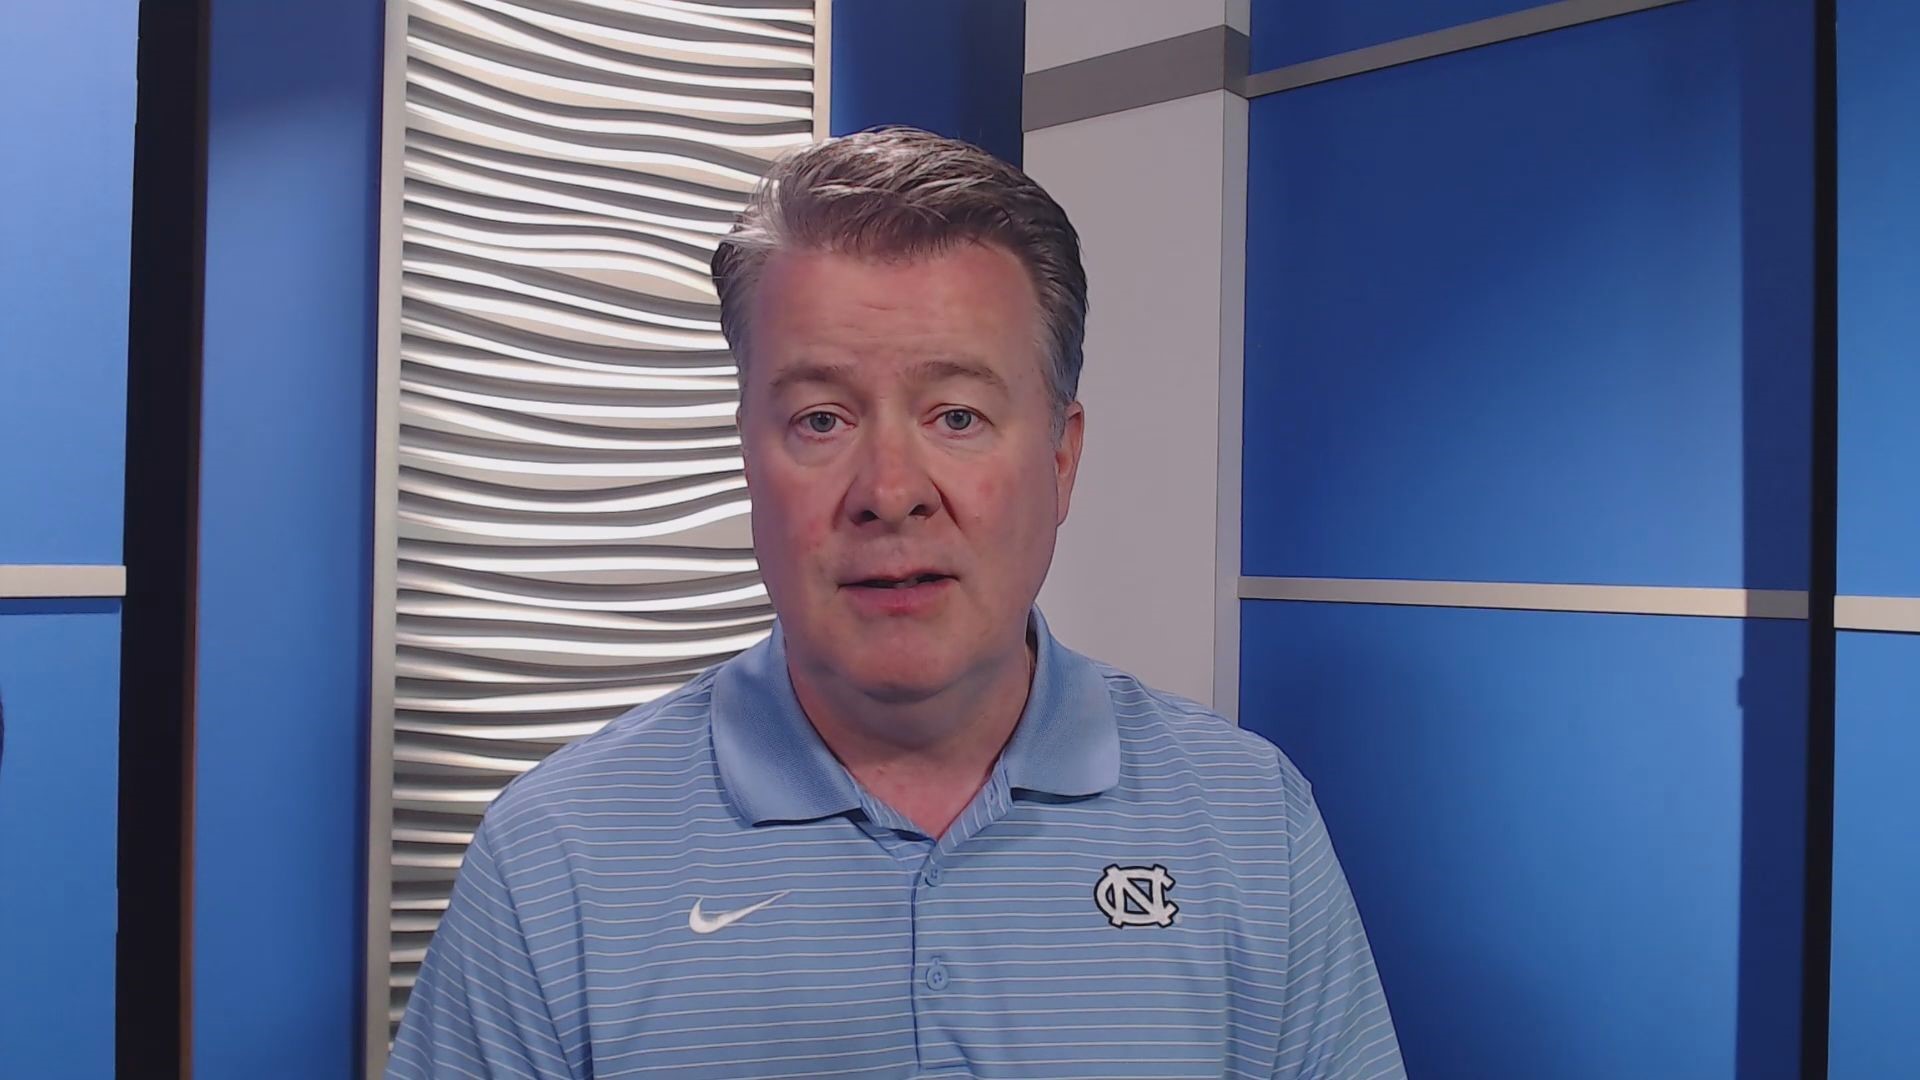 Our Eric Chilton explains why the Duke and Carolina Final Four face-off goes beyond the game.